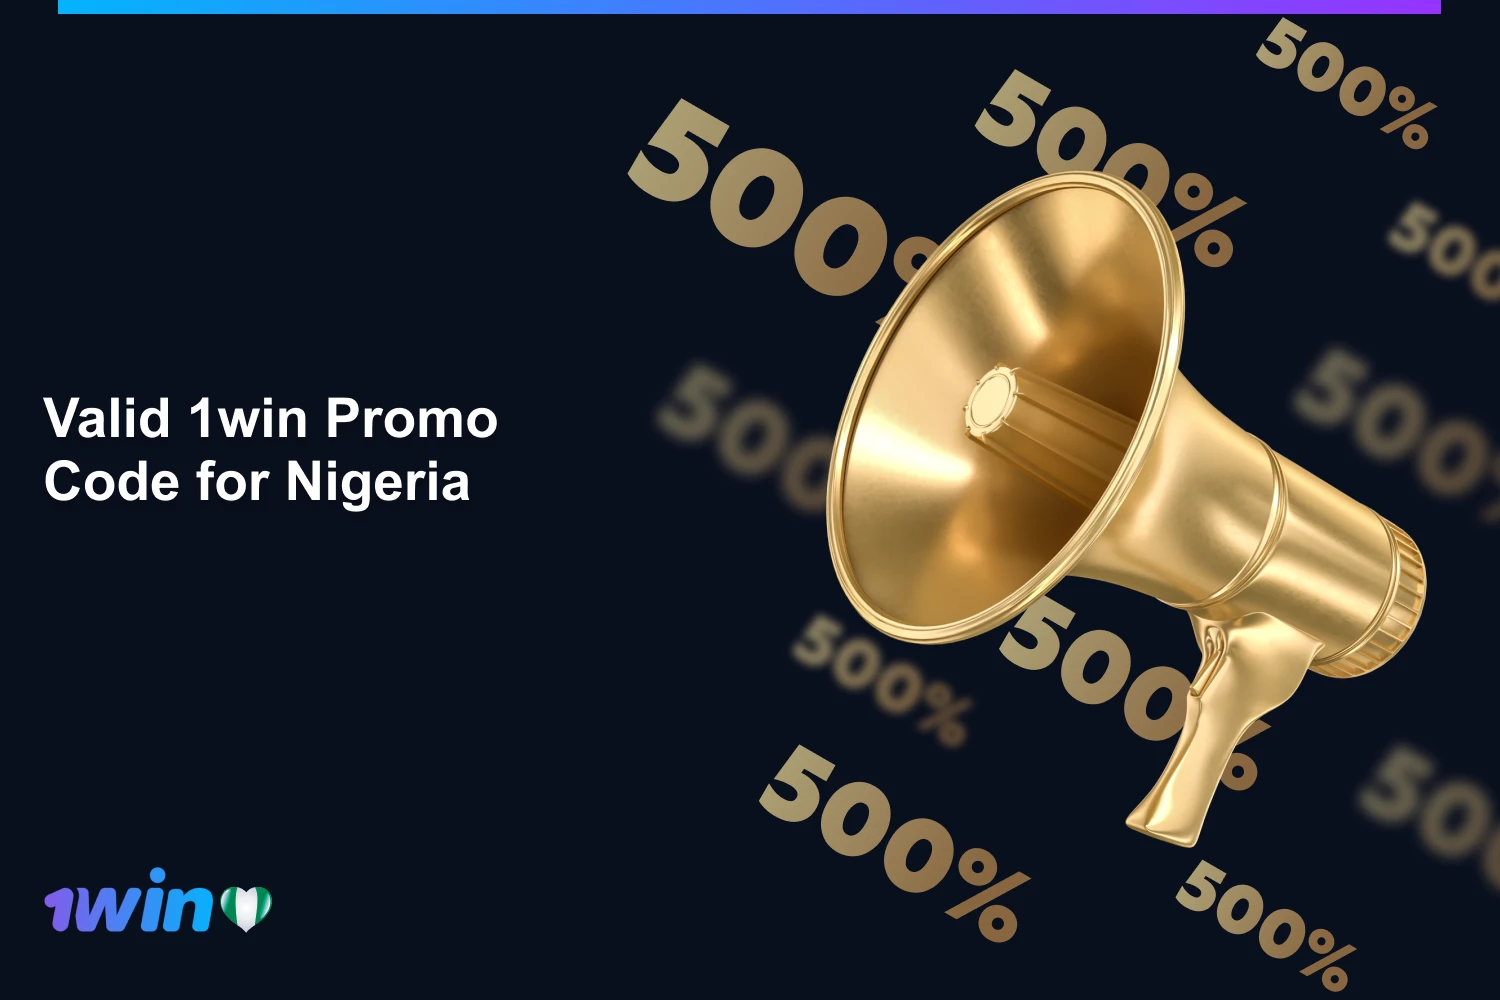 The website of the bookmaker 1win surprises with a variety of promotions and bonuses, as well as promo codes for players from Nigeria